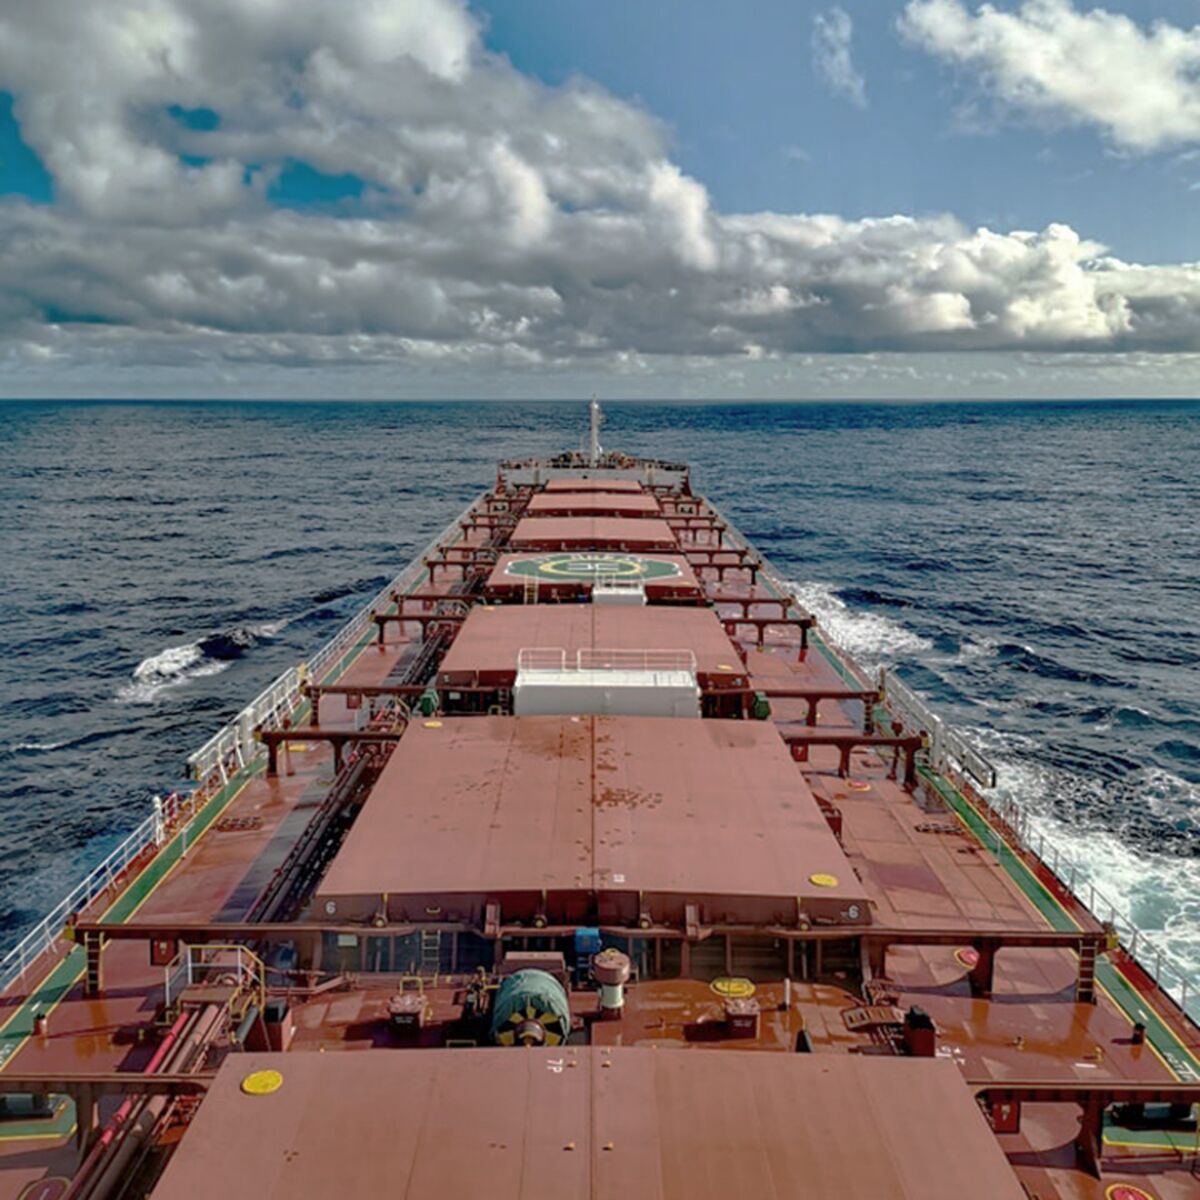 By August, almost half of the 20-person crew on-board the JY Ocean bulk carrier had been at sea for more than a year.